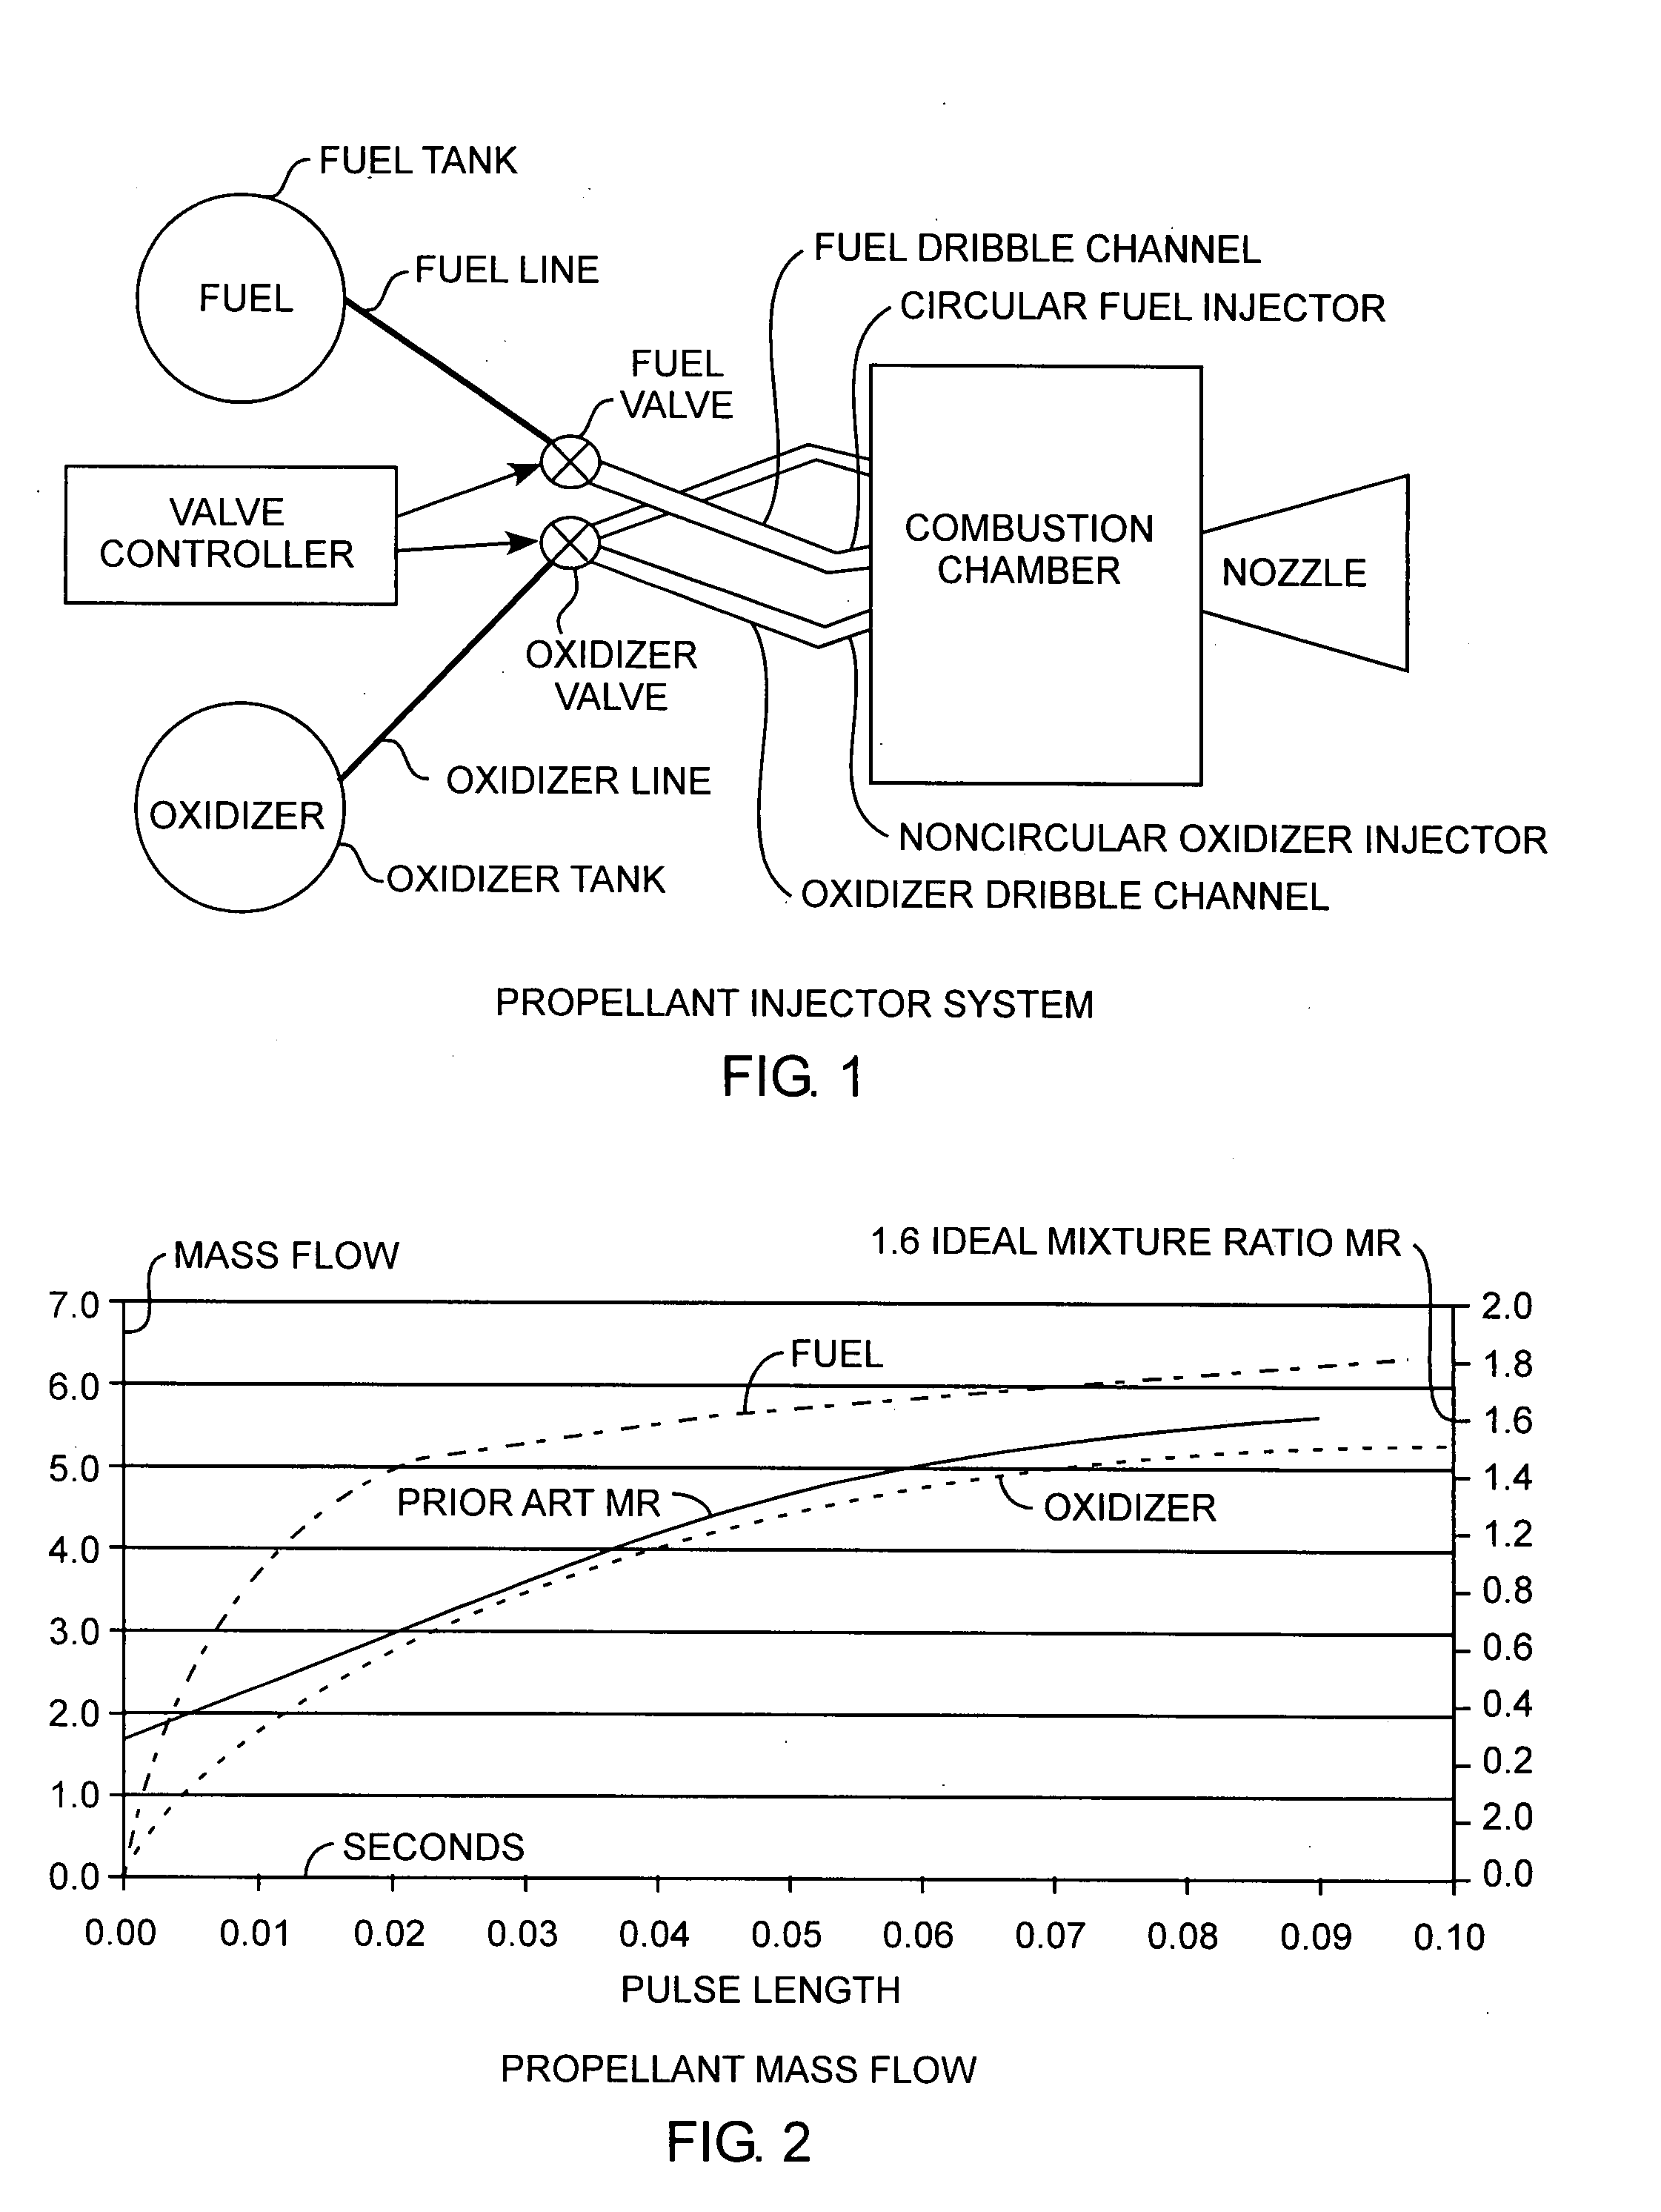 Noncircular transient fluid fuel injector control channels in propellant injector combustion systems